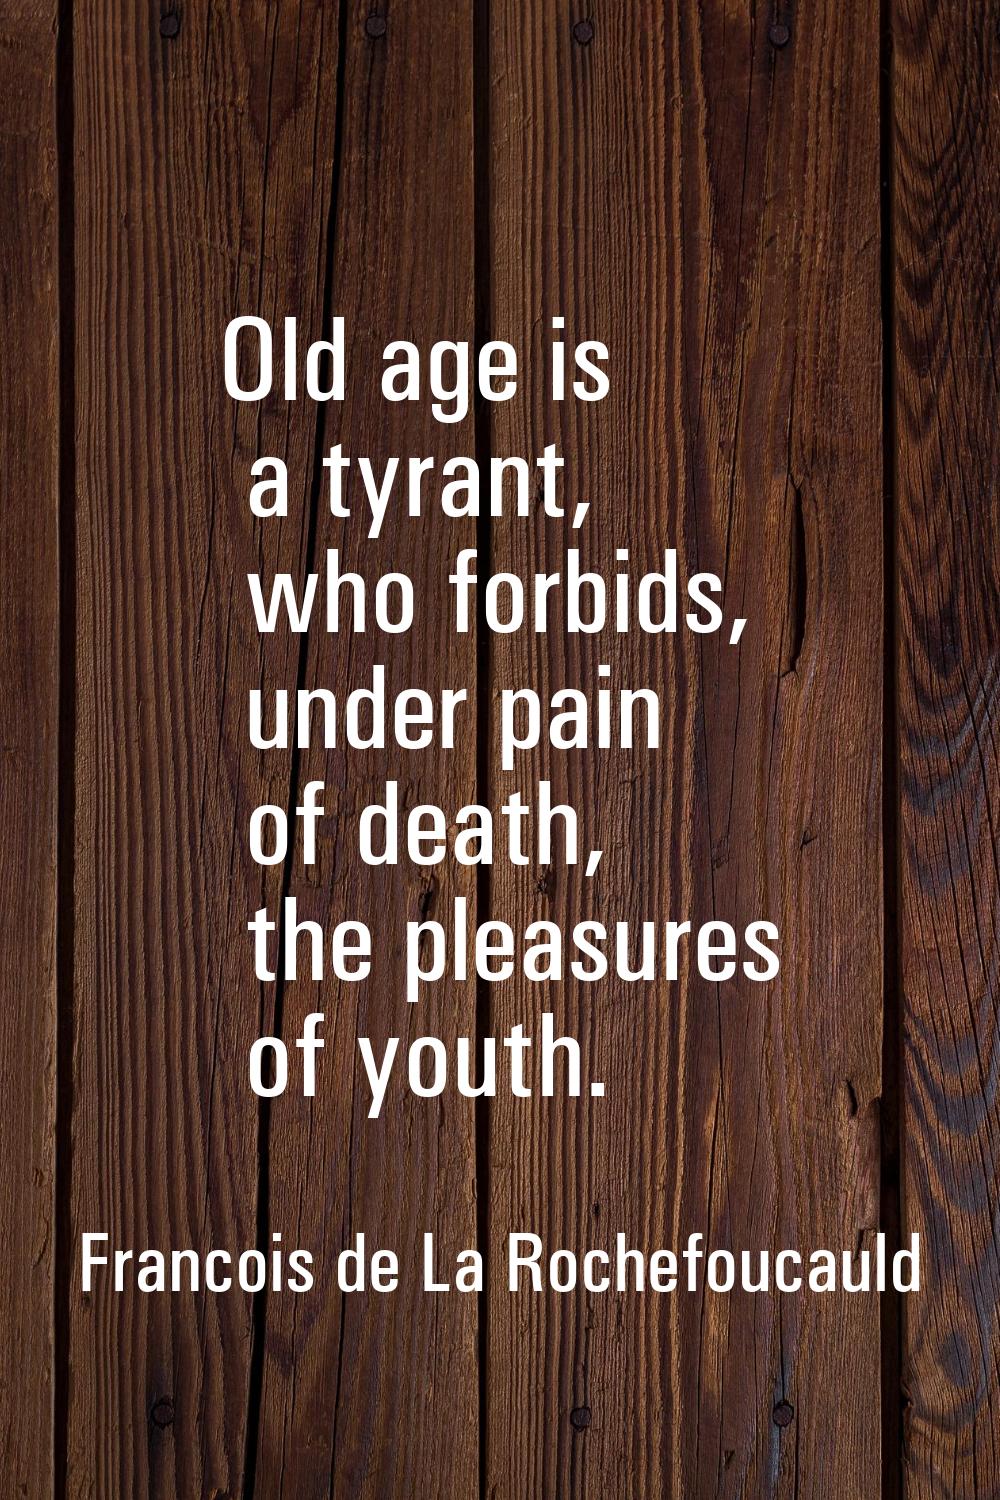 Old age is a tyrant, who forbids, under pain of death, the pleasures of youth.